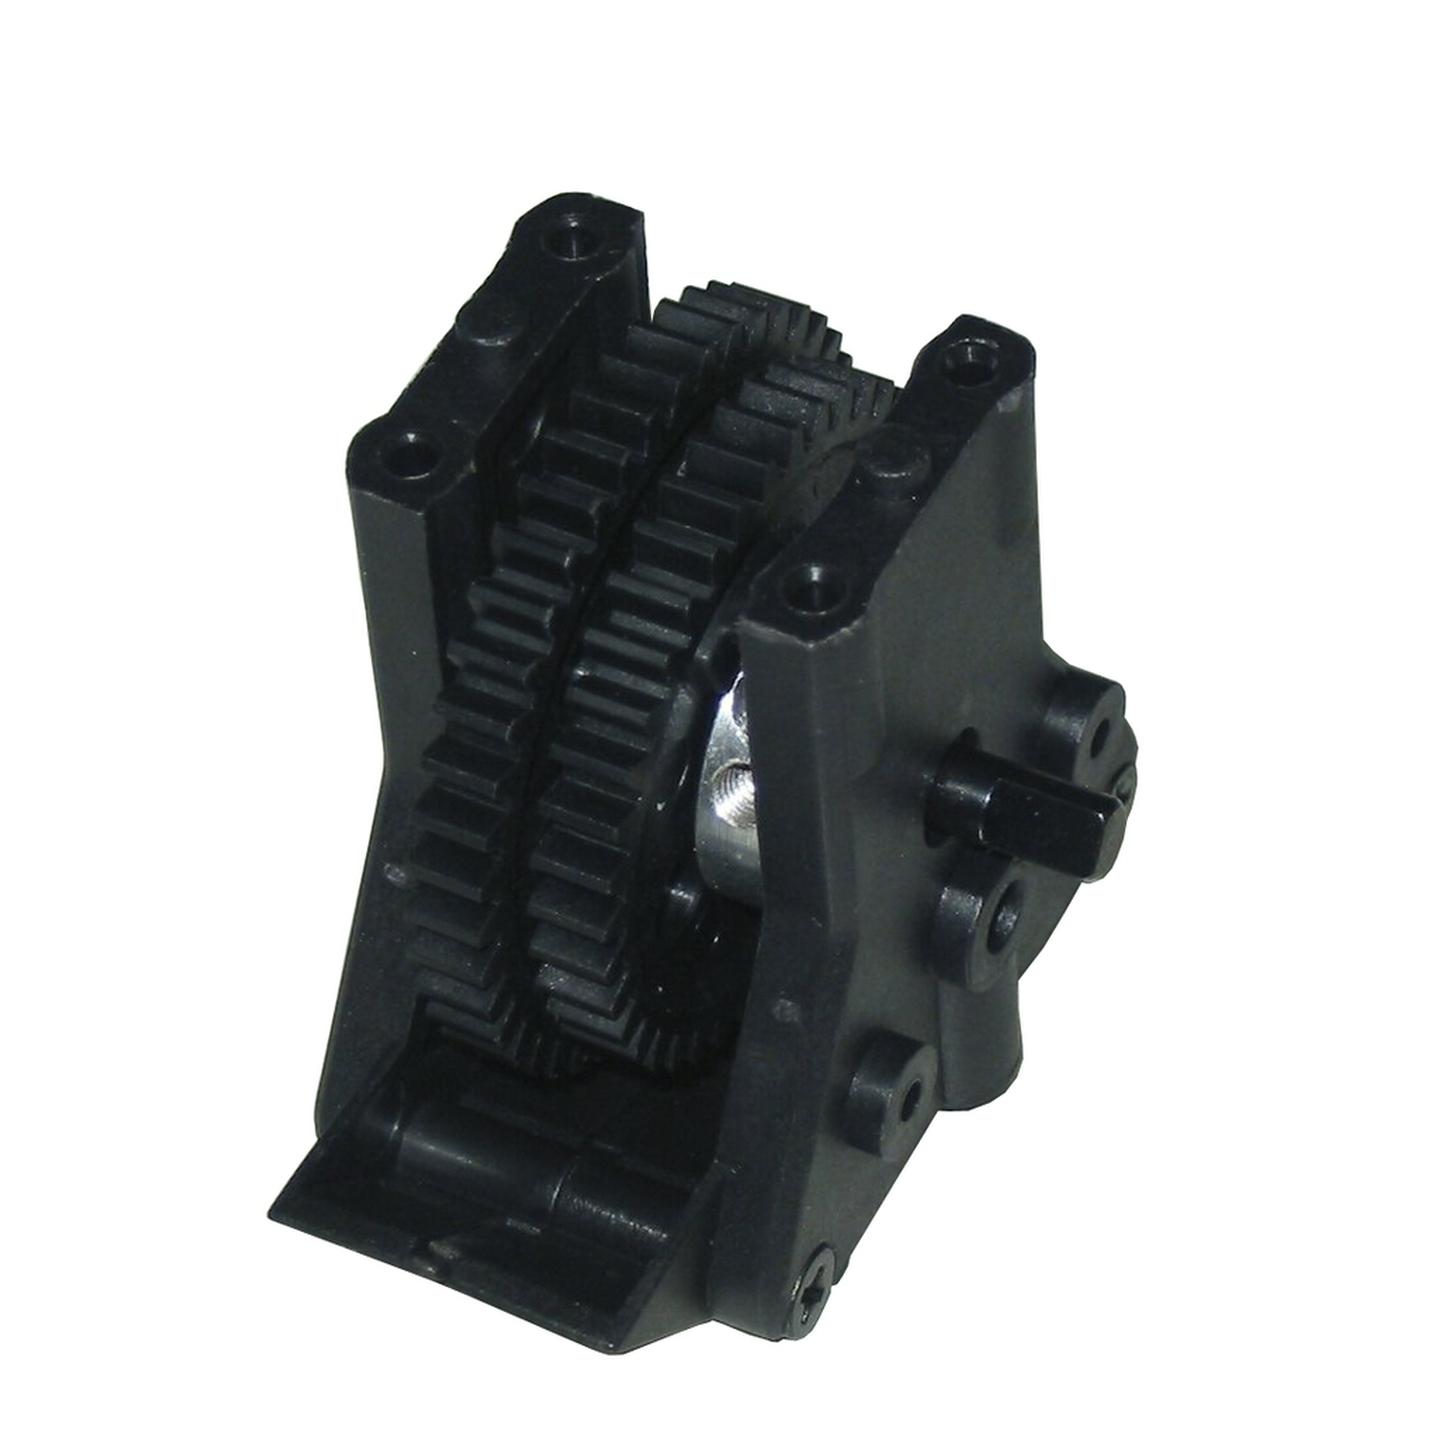 Spare Gearbox Set for GT-3612